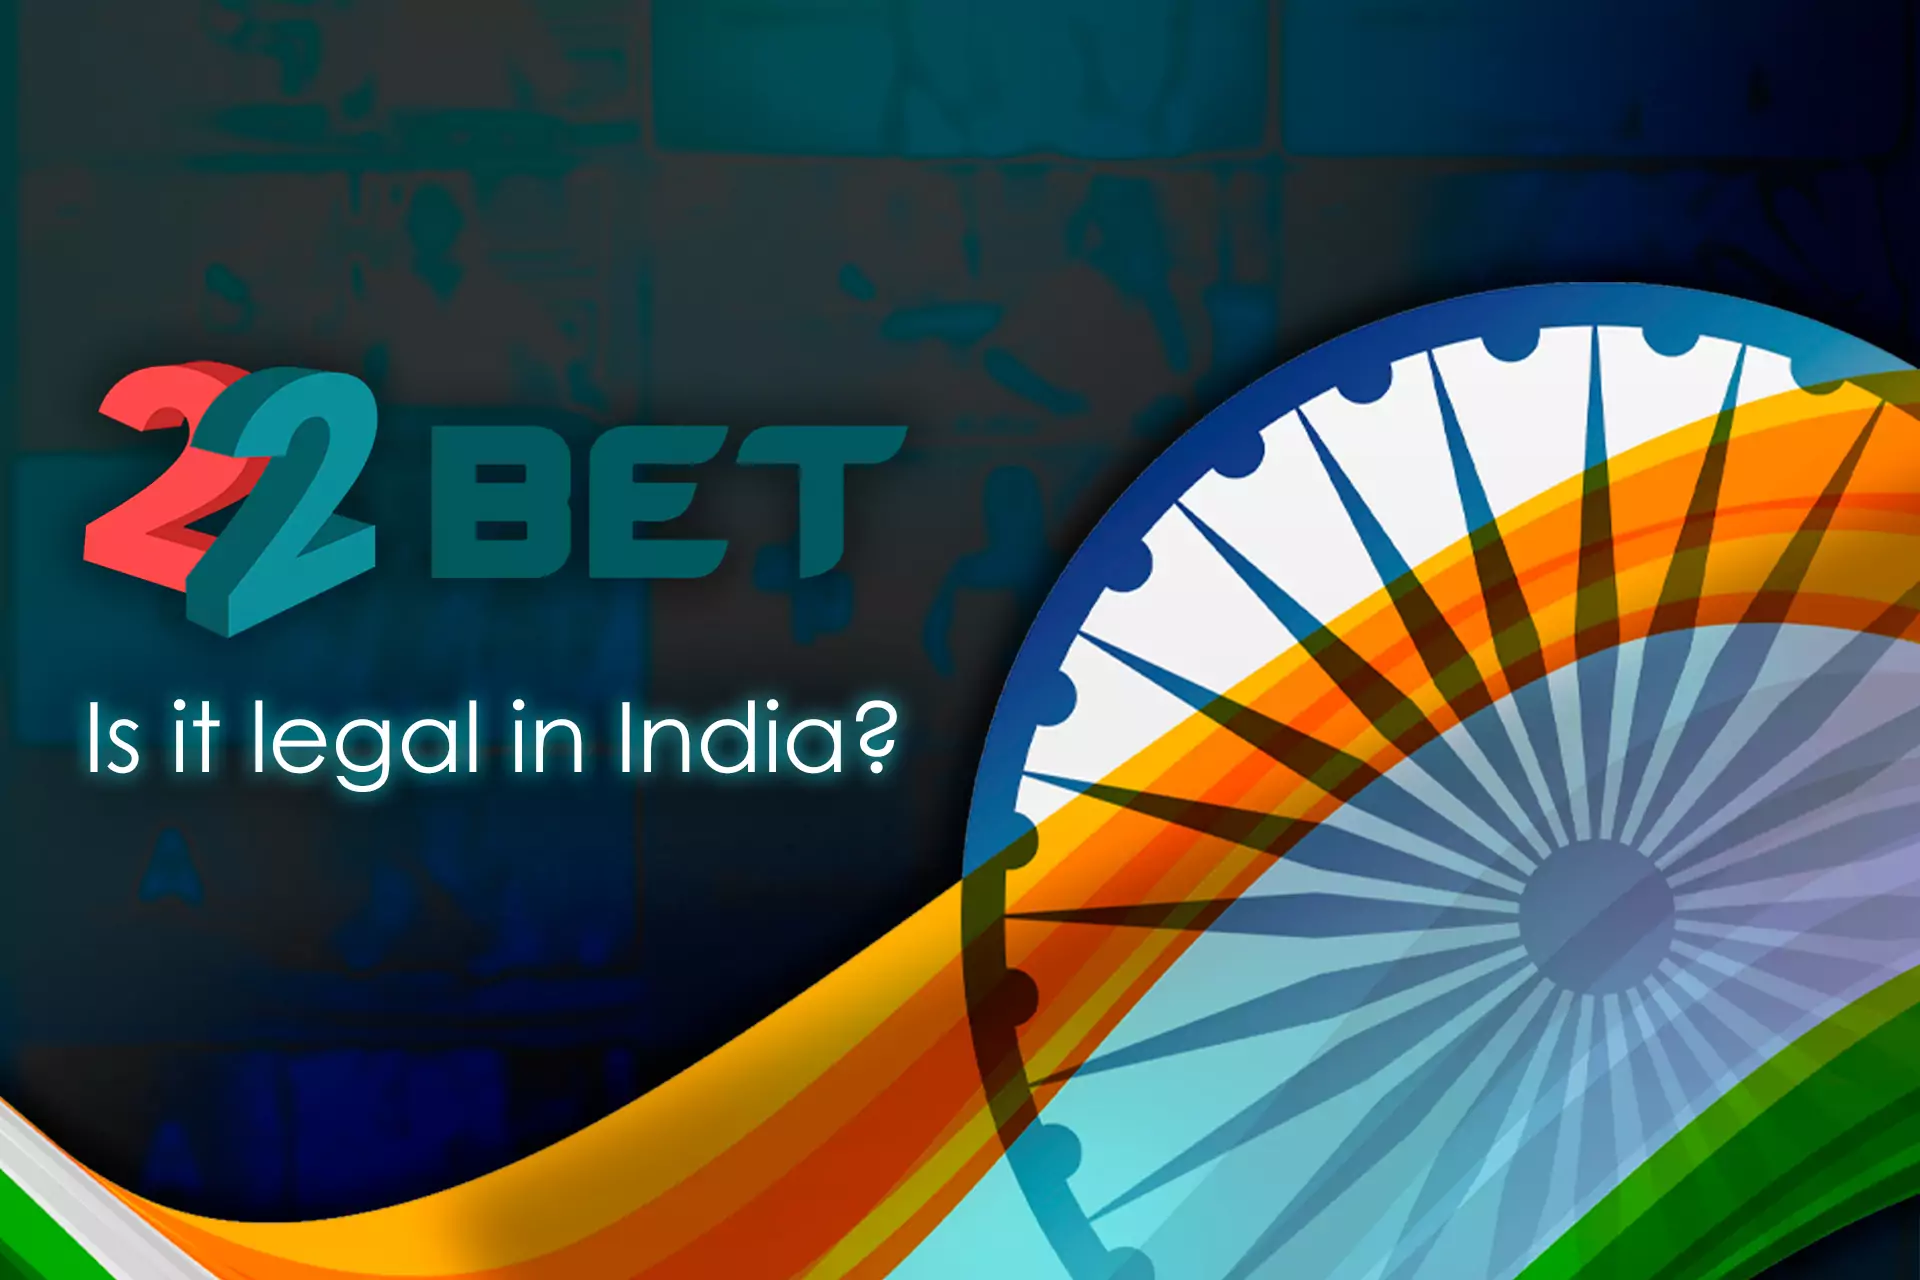 Like many others, the 22bet Casino works under the Curacao license that is legal in India.